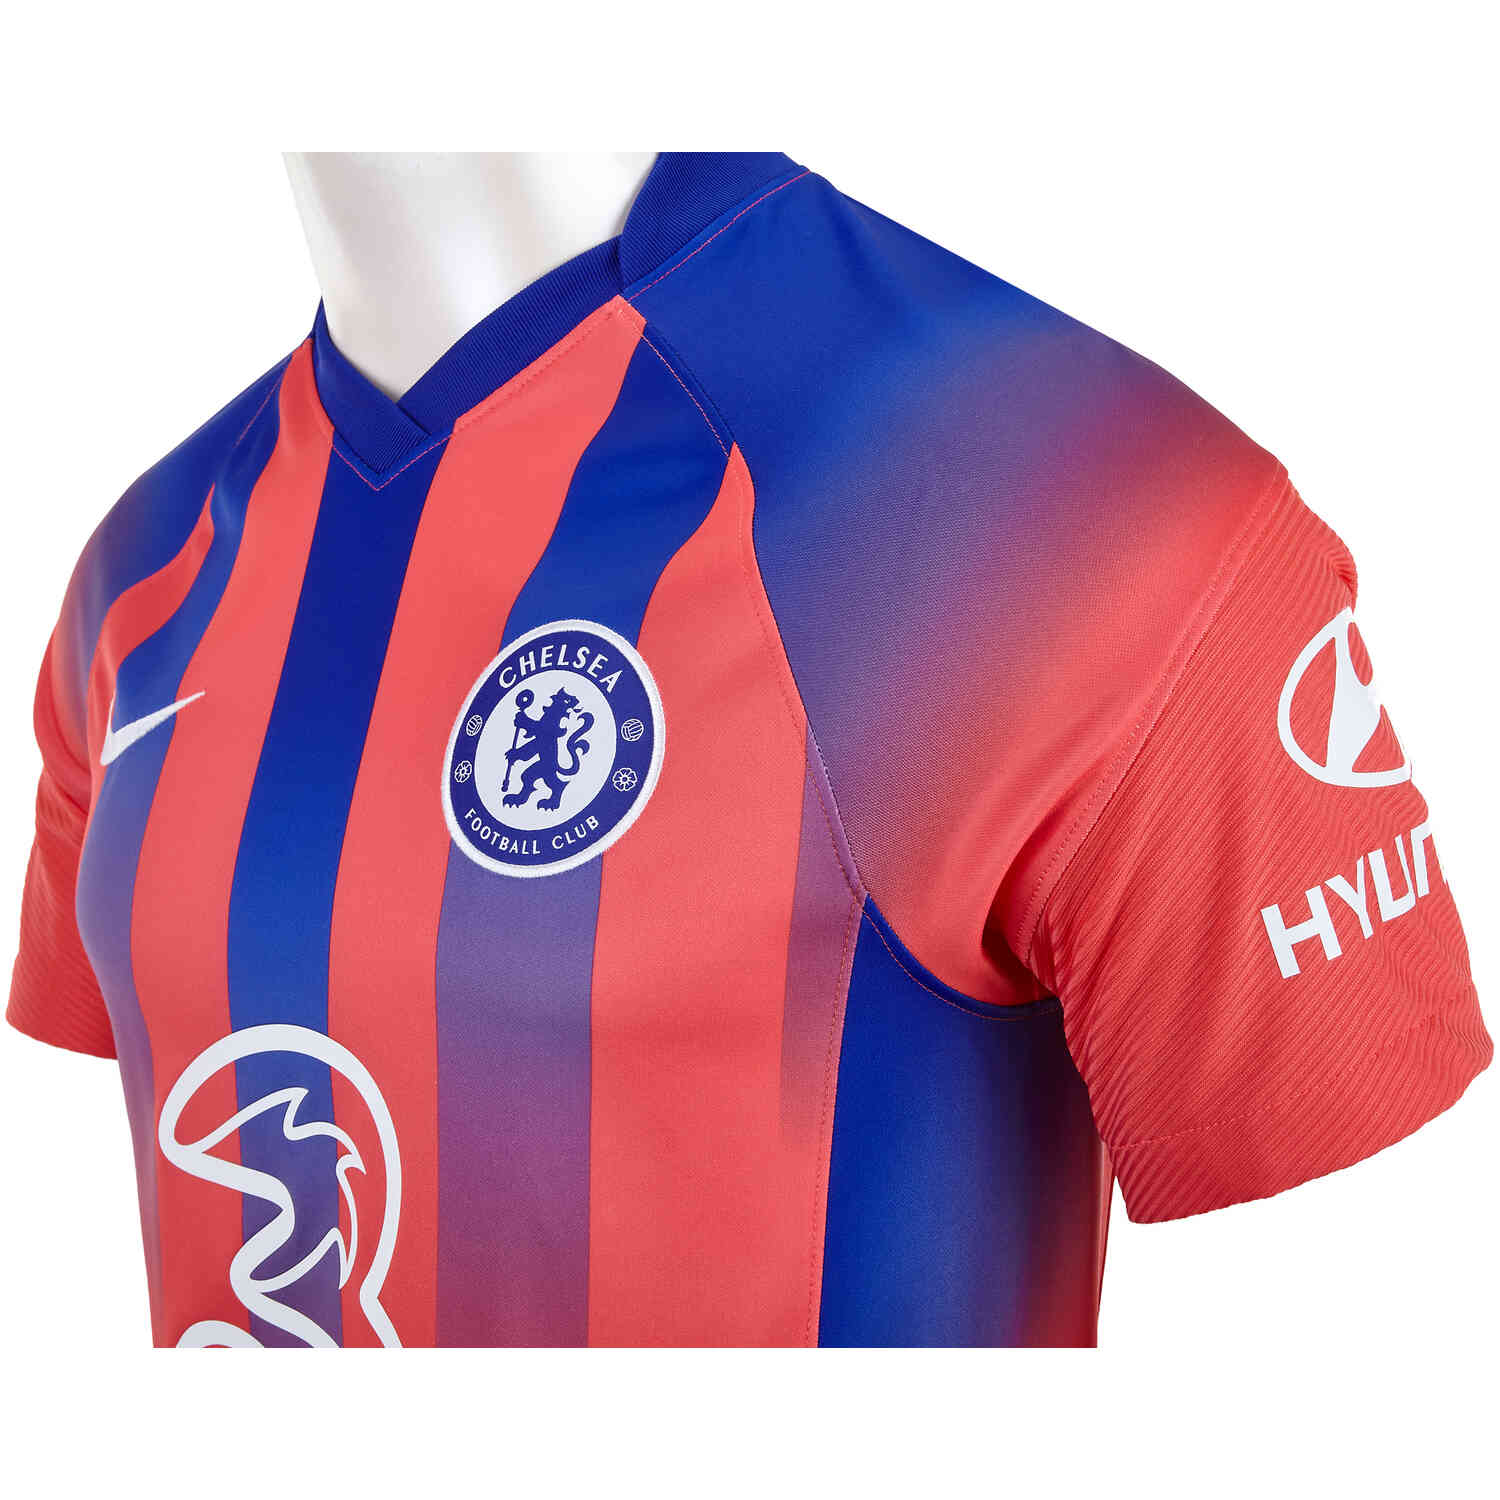 Chelsea 2020/21 Home Jersey by Nike